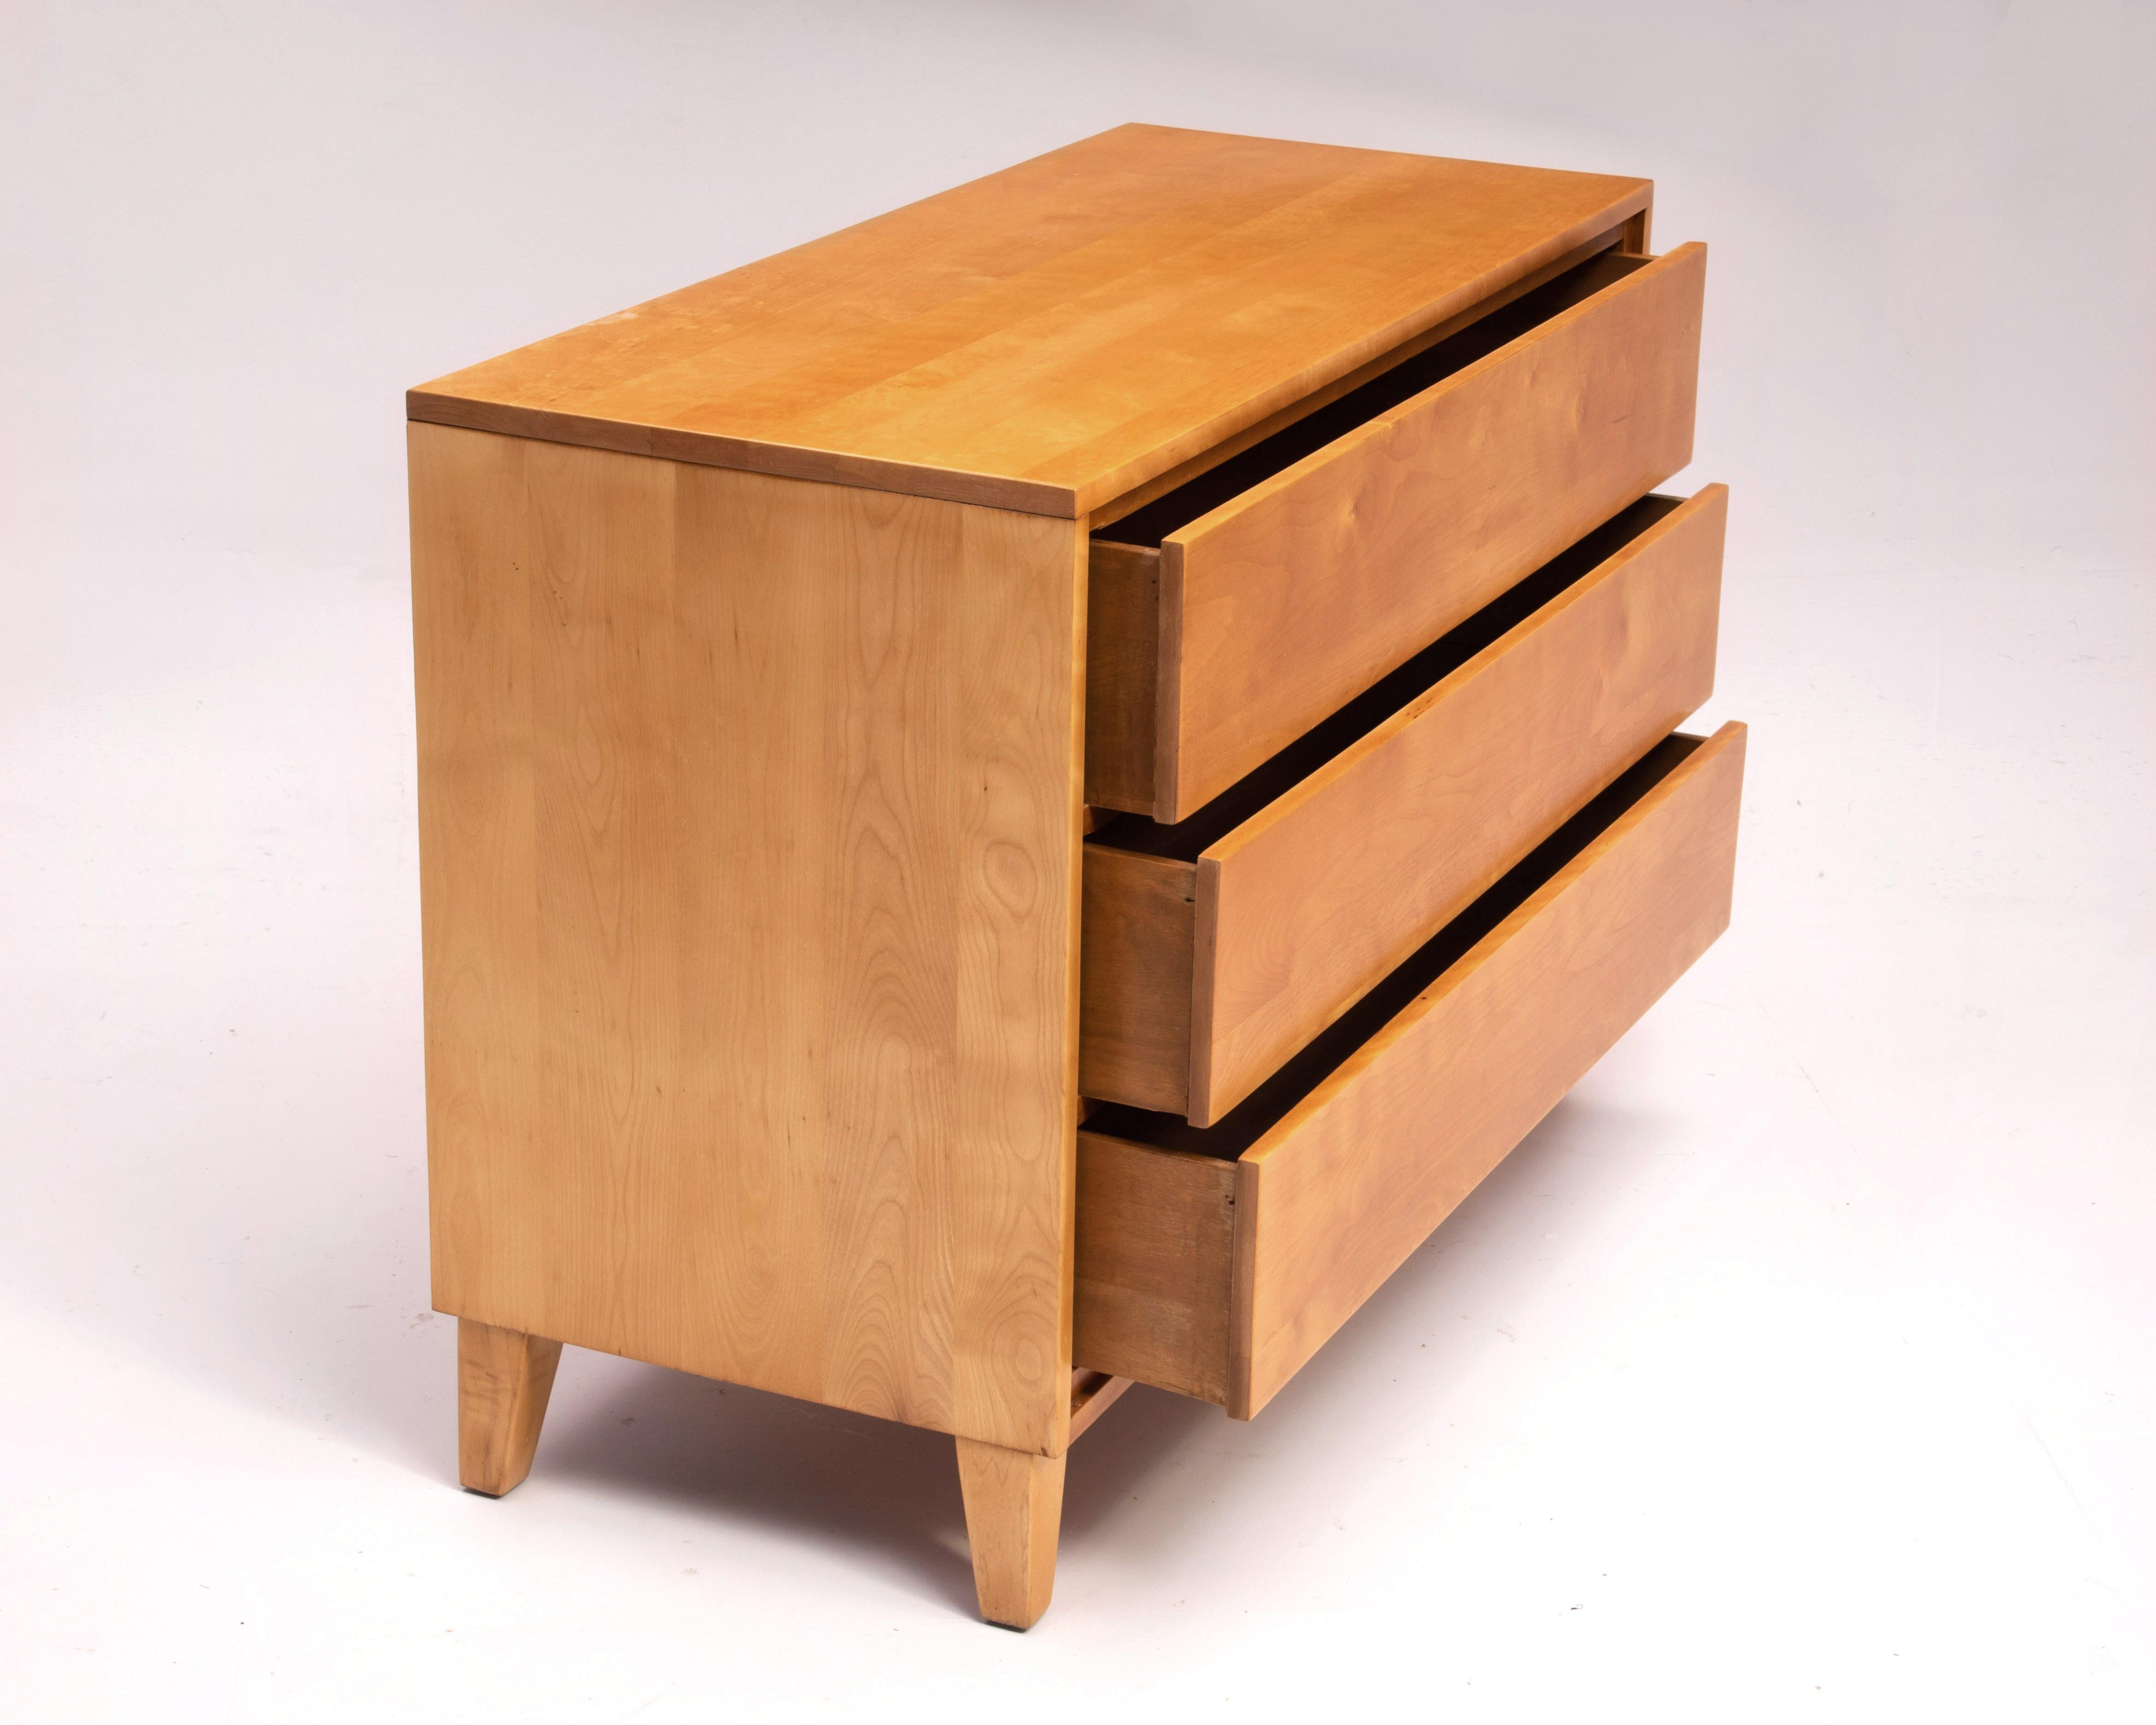 A Mid-Century Modern three-drawer solid birch dresser or chest of drawers by Leslie Diamond for the Conant Ball 